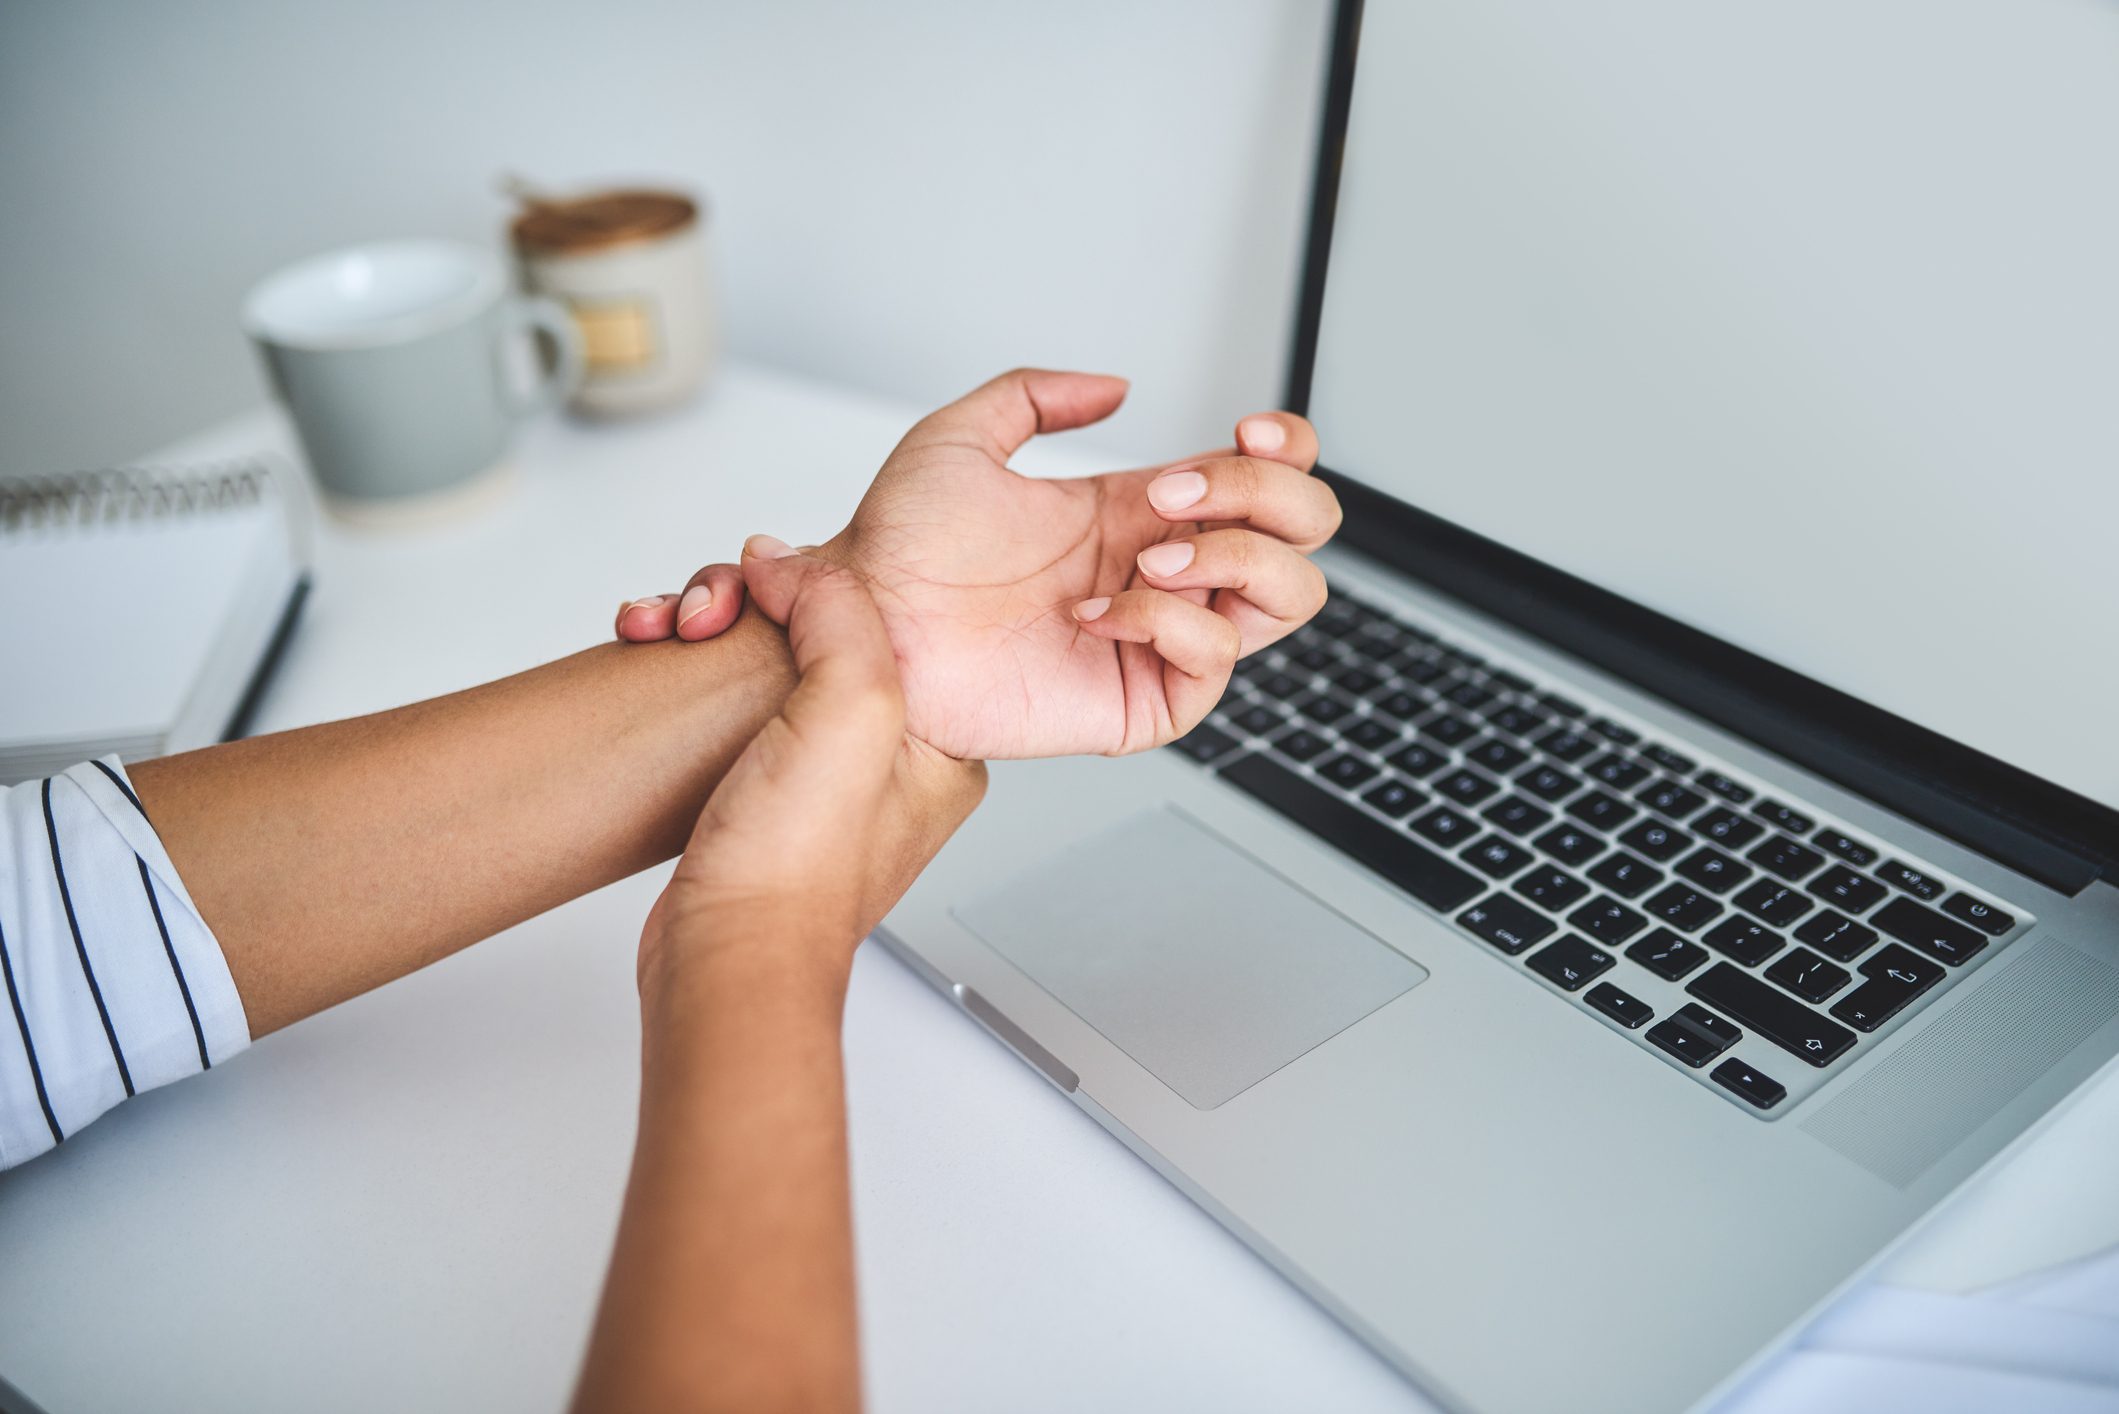 Carpal Tunnel Syndrome: What to Know About the Symptoms, Causes, and Treatments